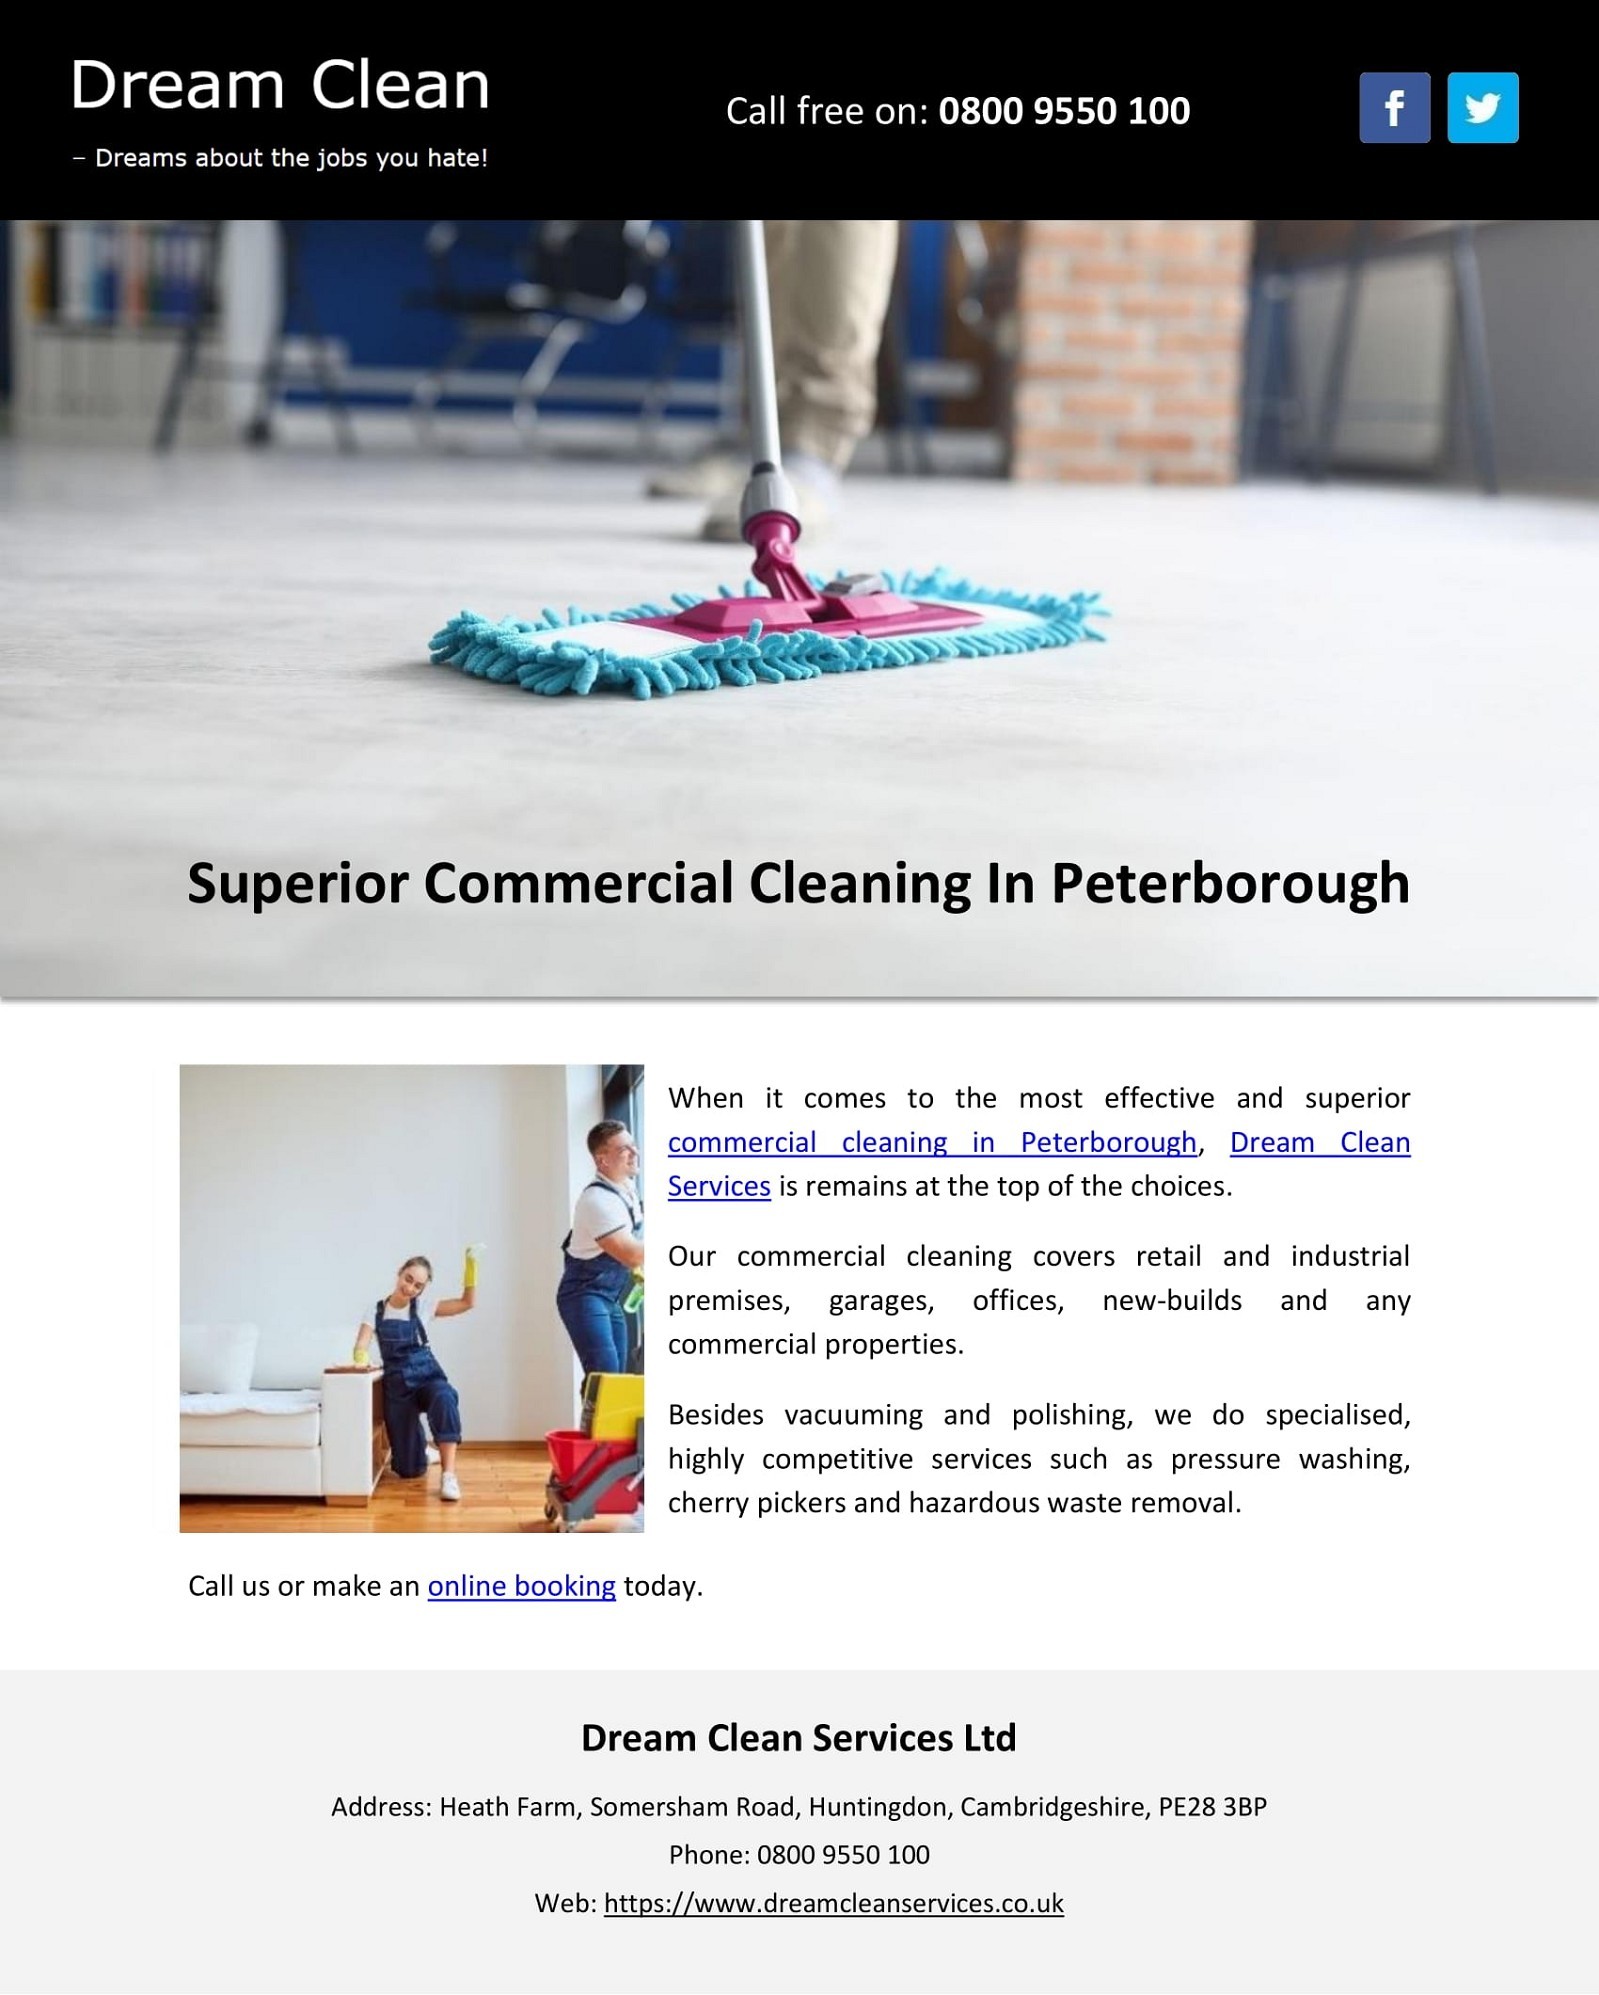 Superior Commercial Cleaning In Peterborough